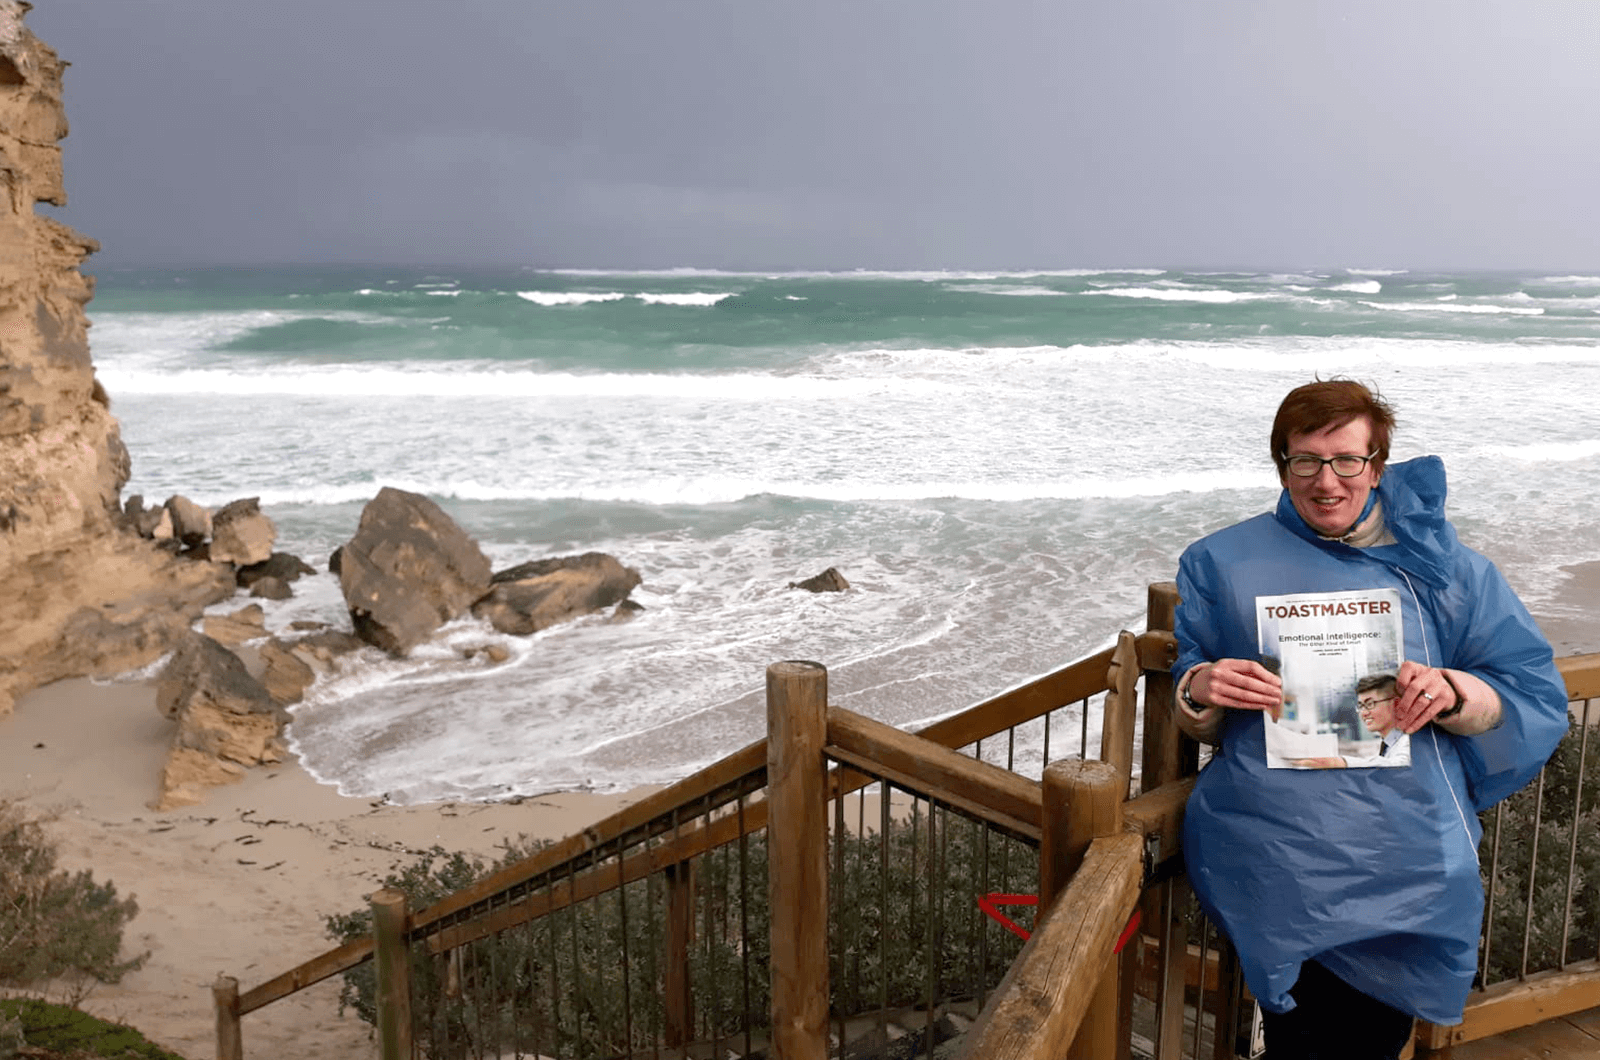 Grainne Gillen of Donegal, Ireland, stands at Seal Bay on Kangaroo Island, Australia. The bay is known for its Australian sea lion population. 